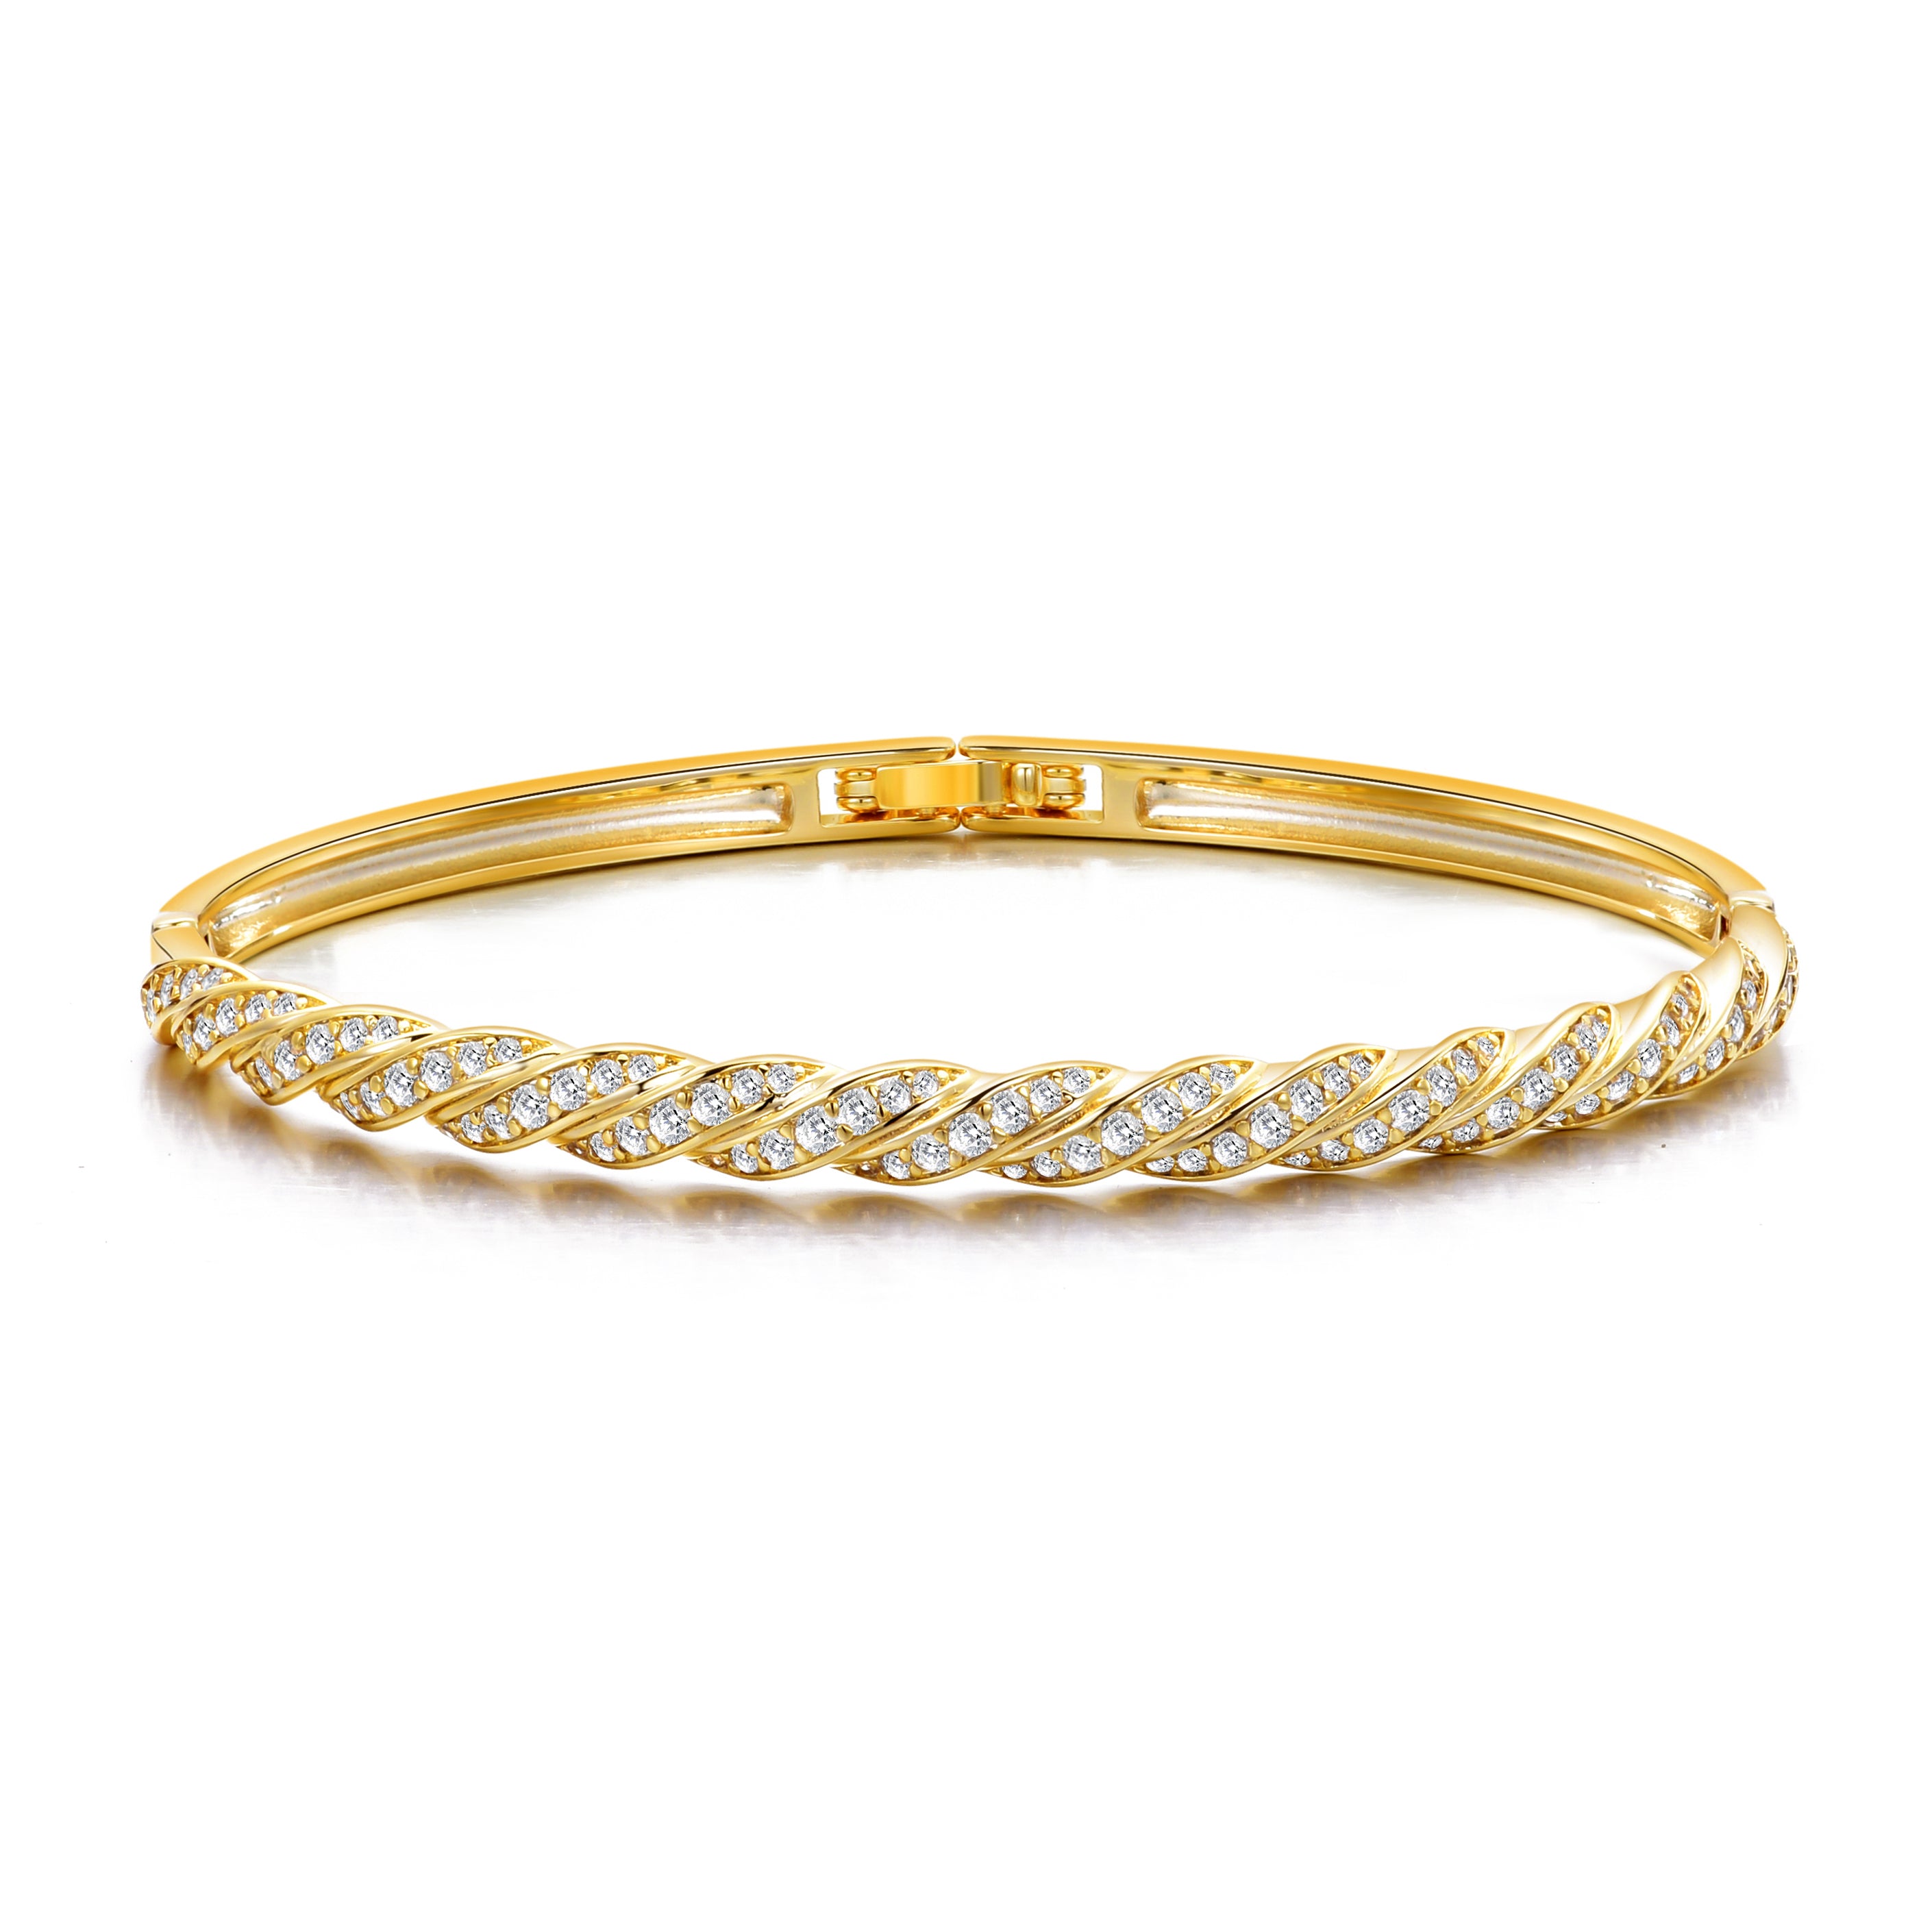 Gold Plated Twist Bangle Created with Zircondia® Crystals by Philip Jones Jewellery